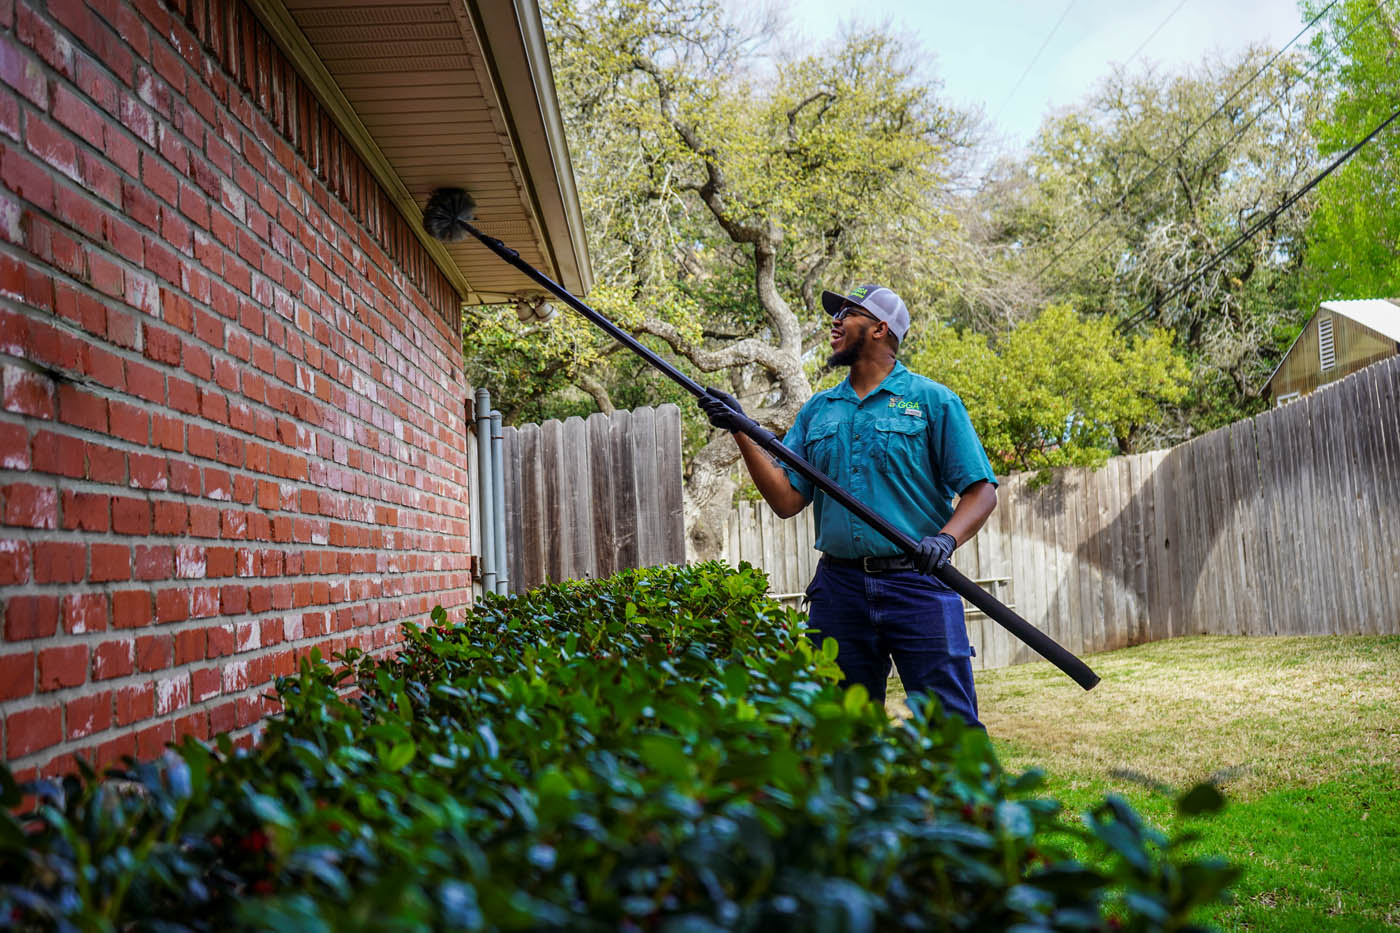 A technician from GGA Pest Management Hillsboro cleaning the exterior of a home after a critter control visit.